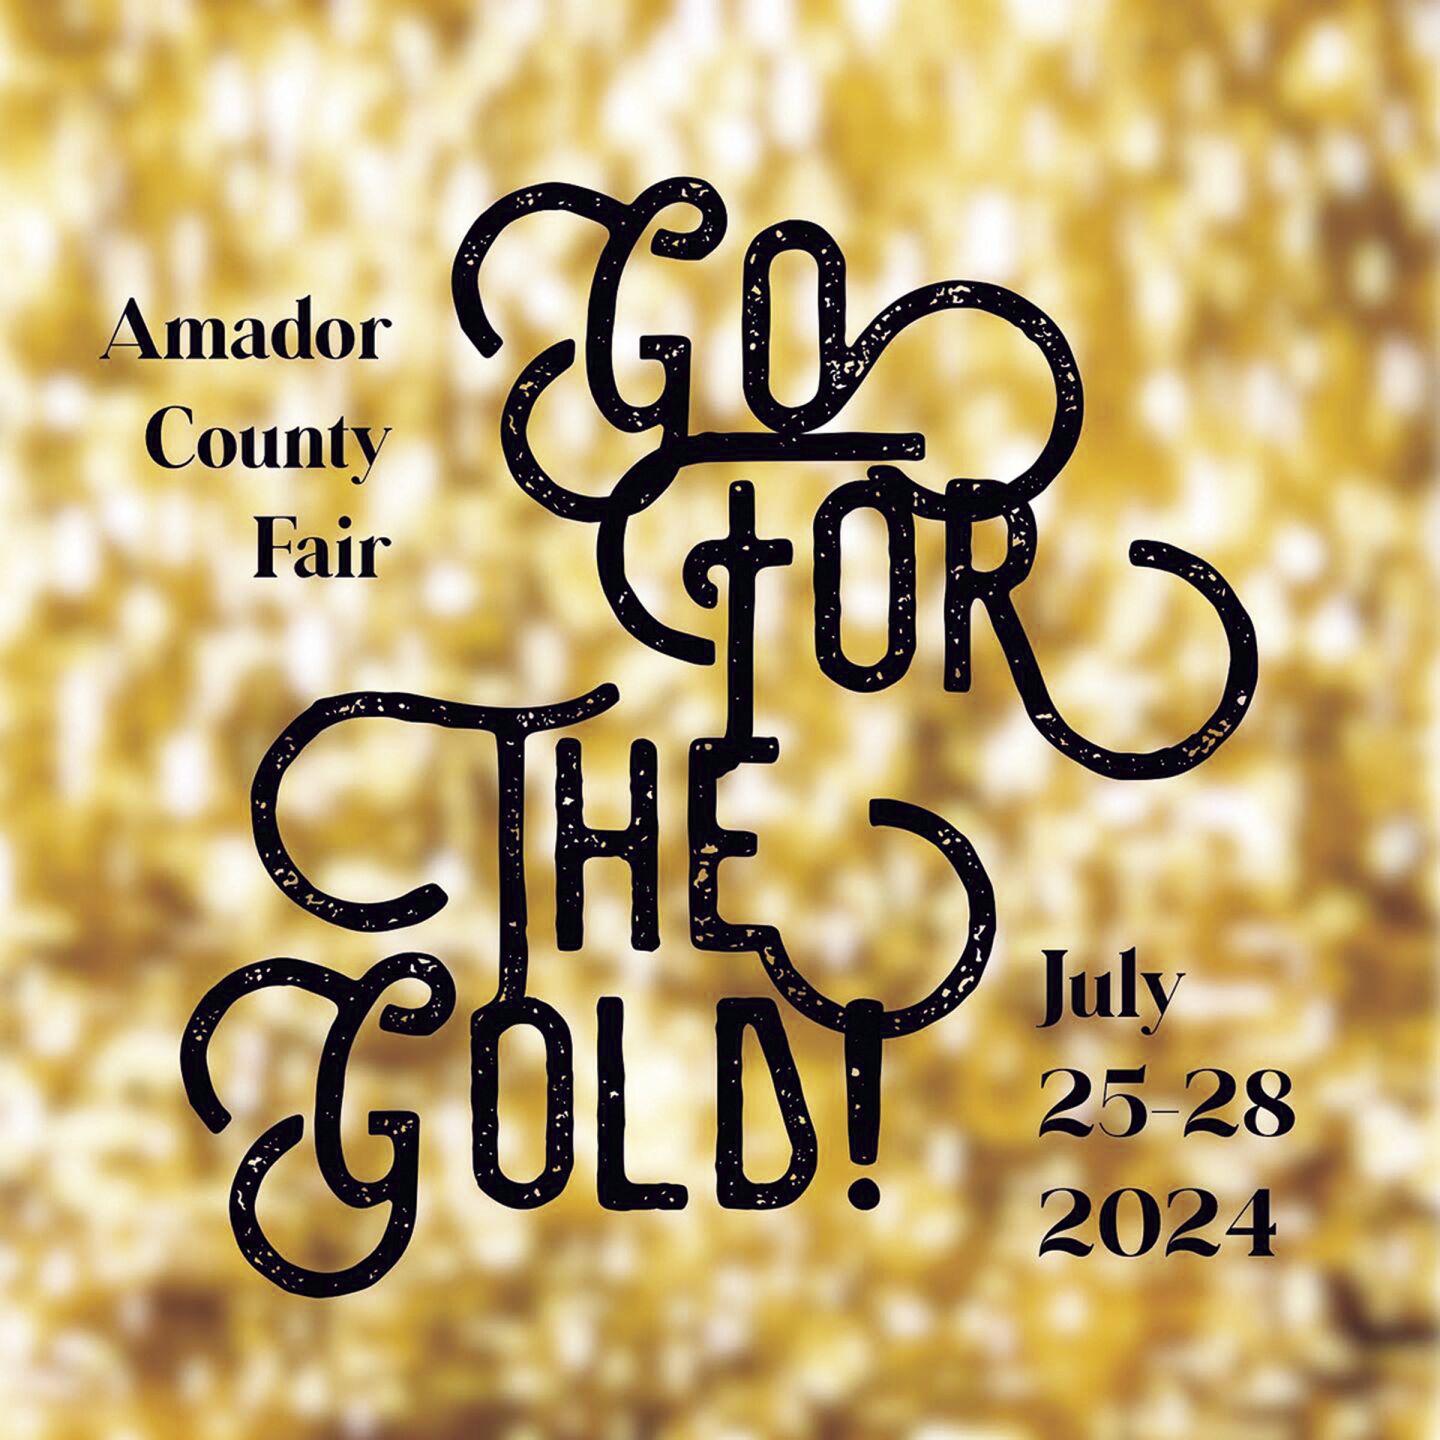 Amador County Fair ready to 'Go For The Gold' in 2024! Roots ledger